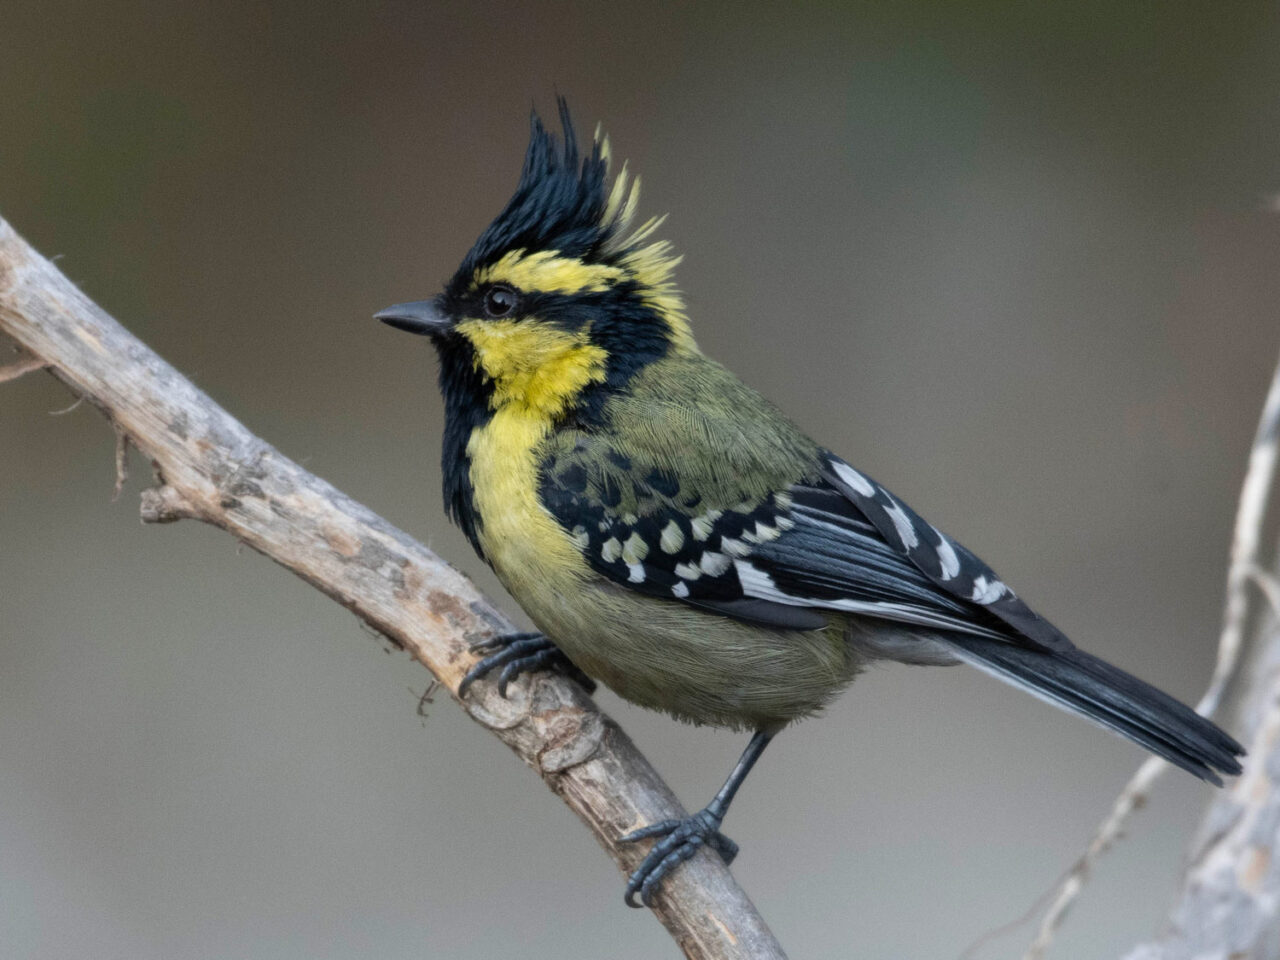 A small yellow and black songbird with a tall, pointed crest.